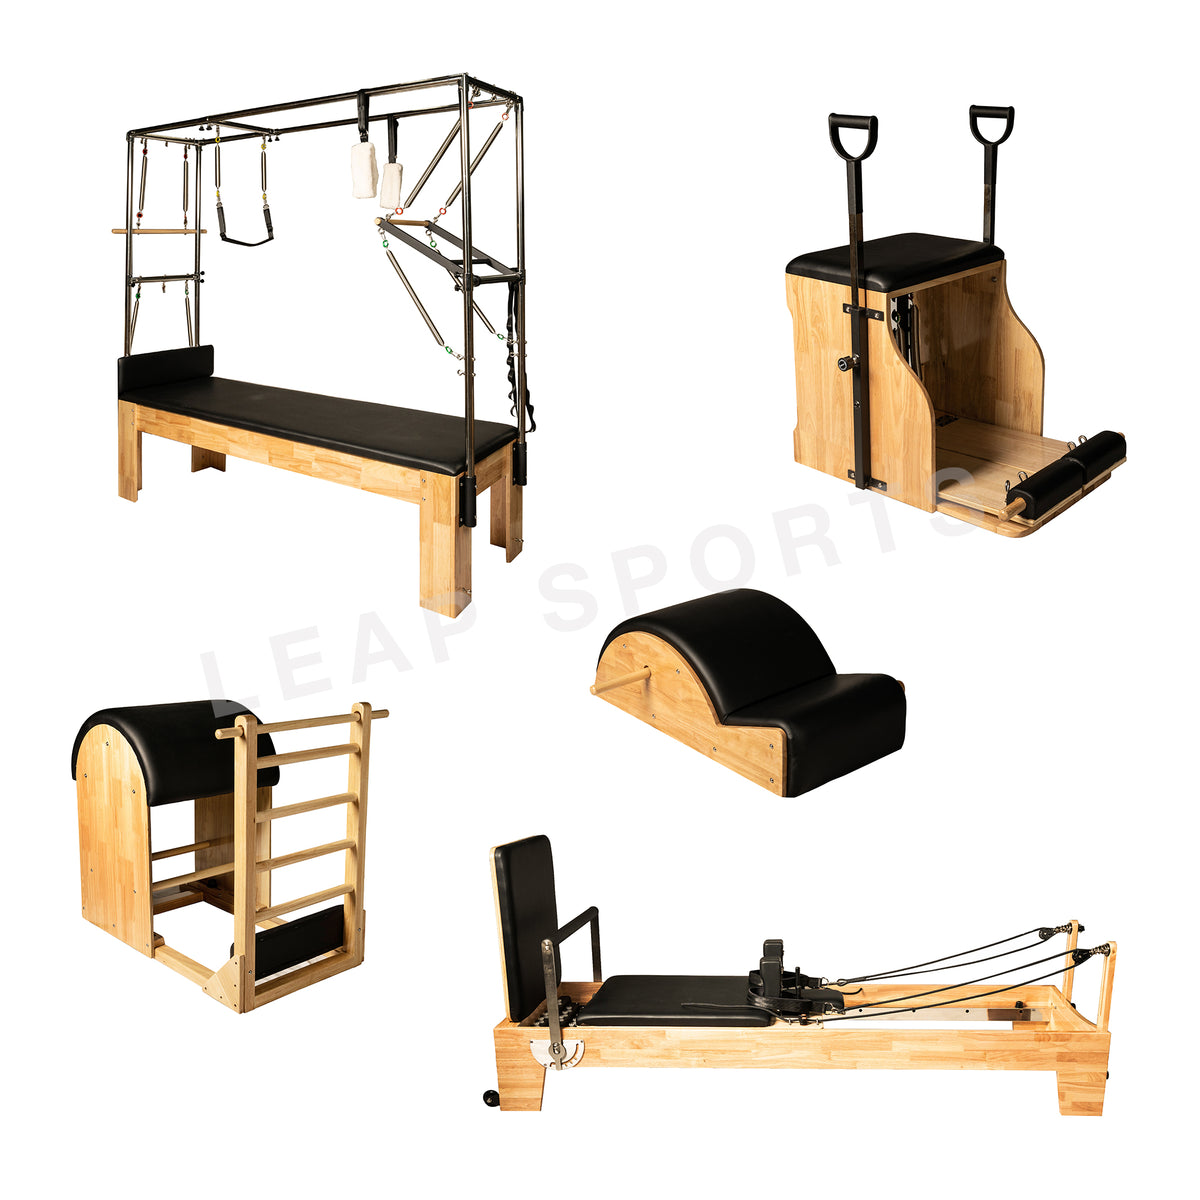 Pilates Equipment for sale : Discover the Complete Pilates Equipment -  Jetzpilates - Medium